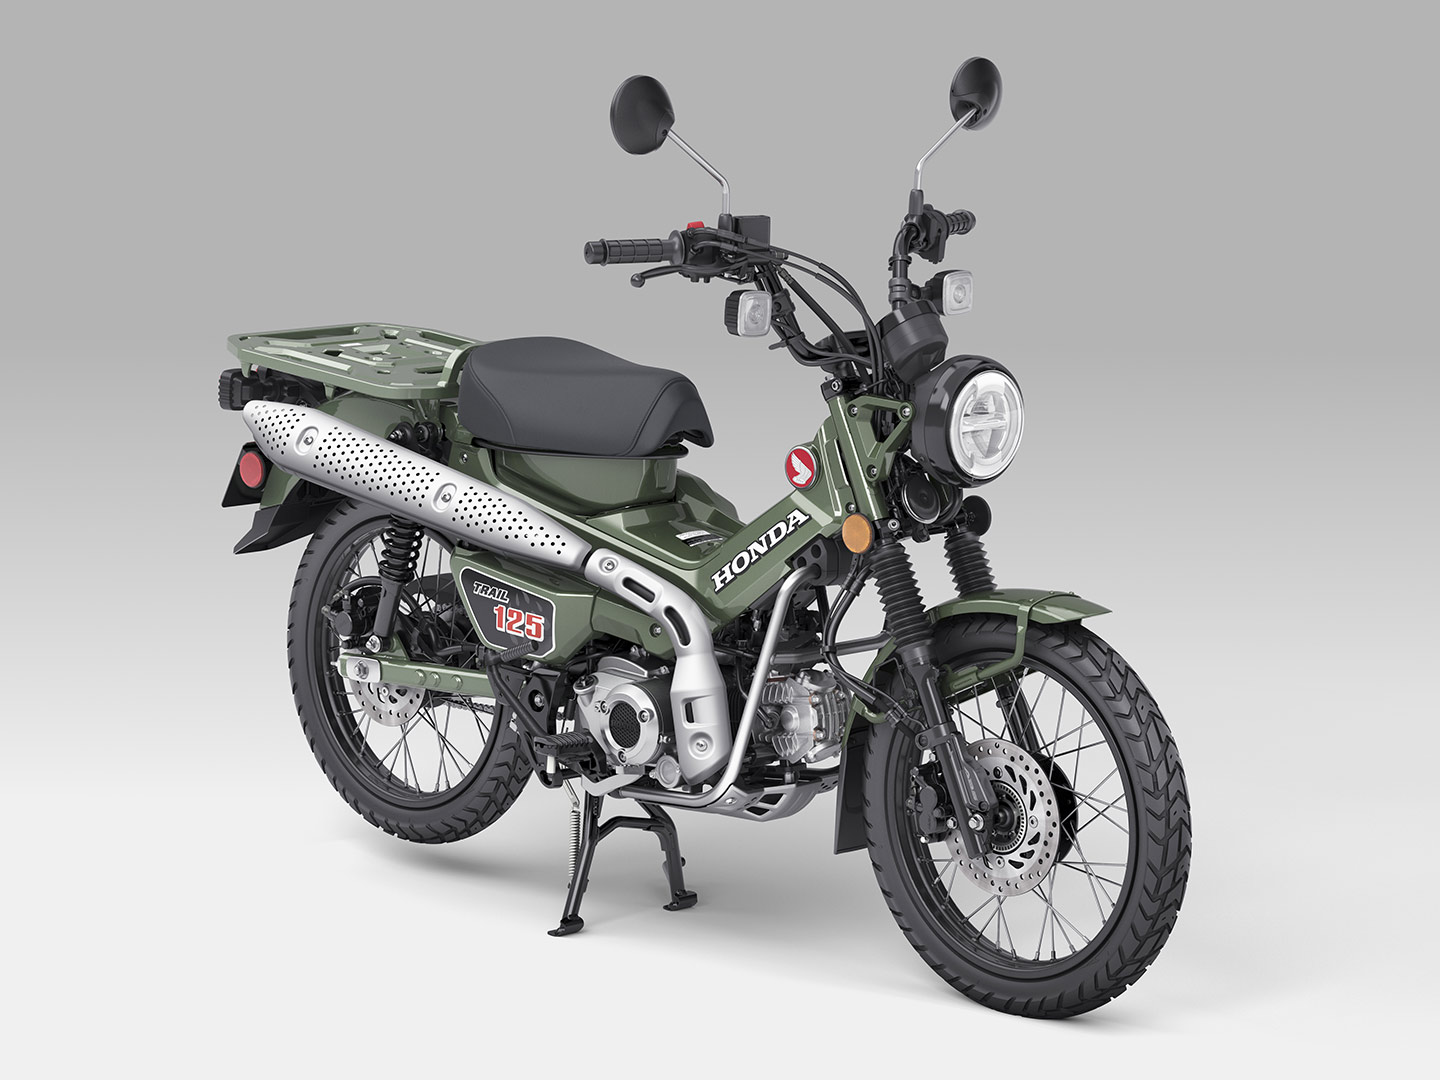 pocket bikes 150cc, pocket bikes 150cc Suppliers and Manufacturers